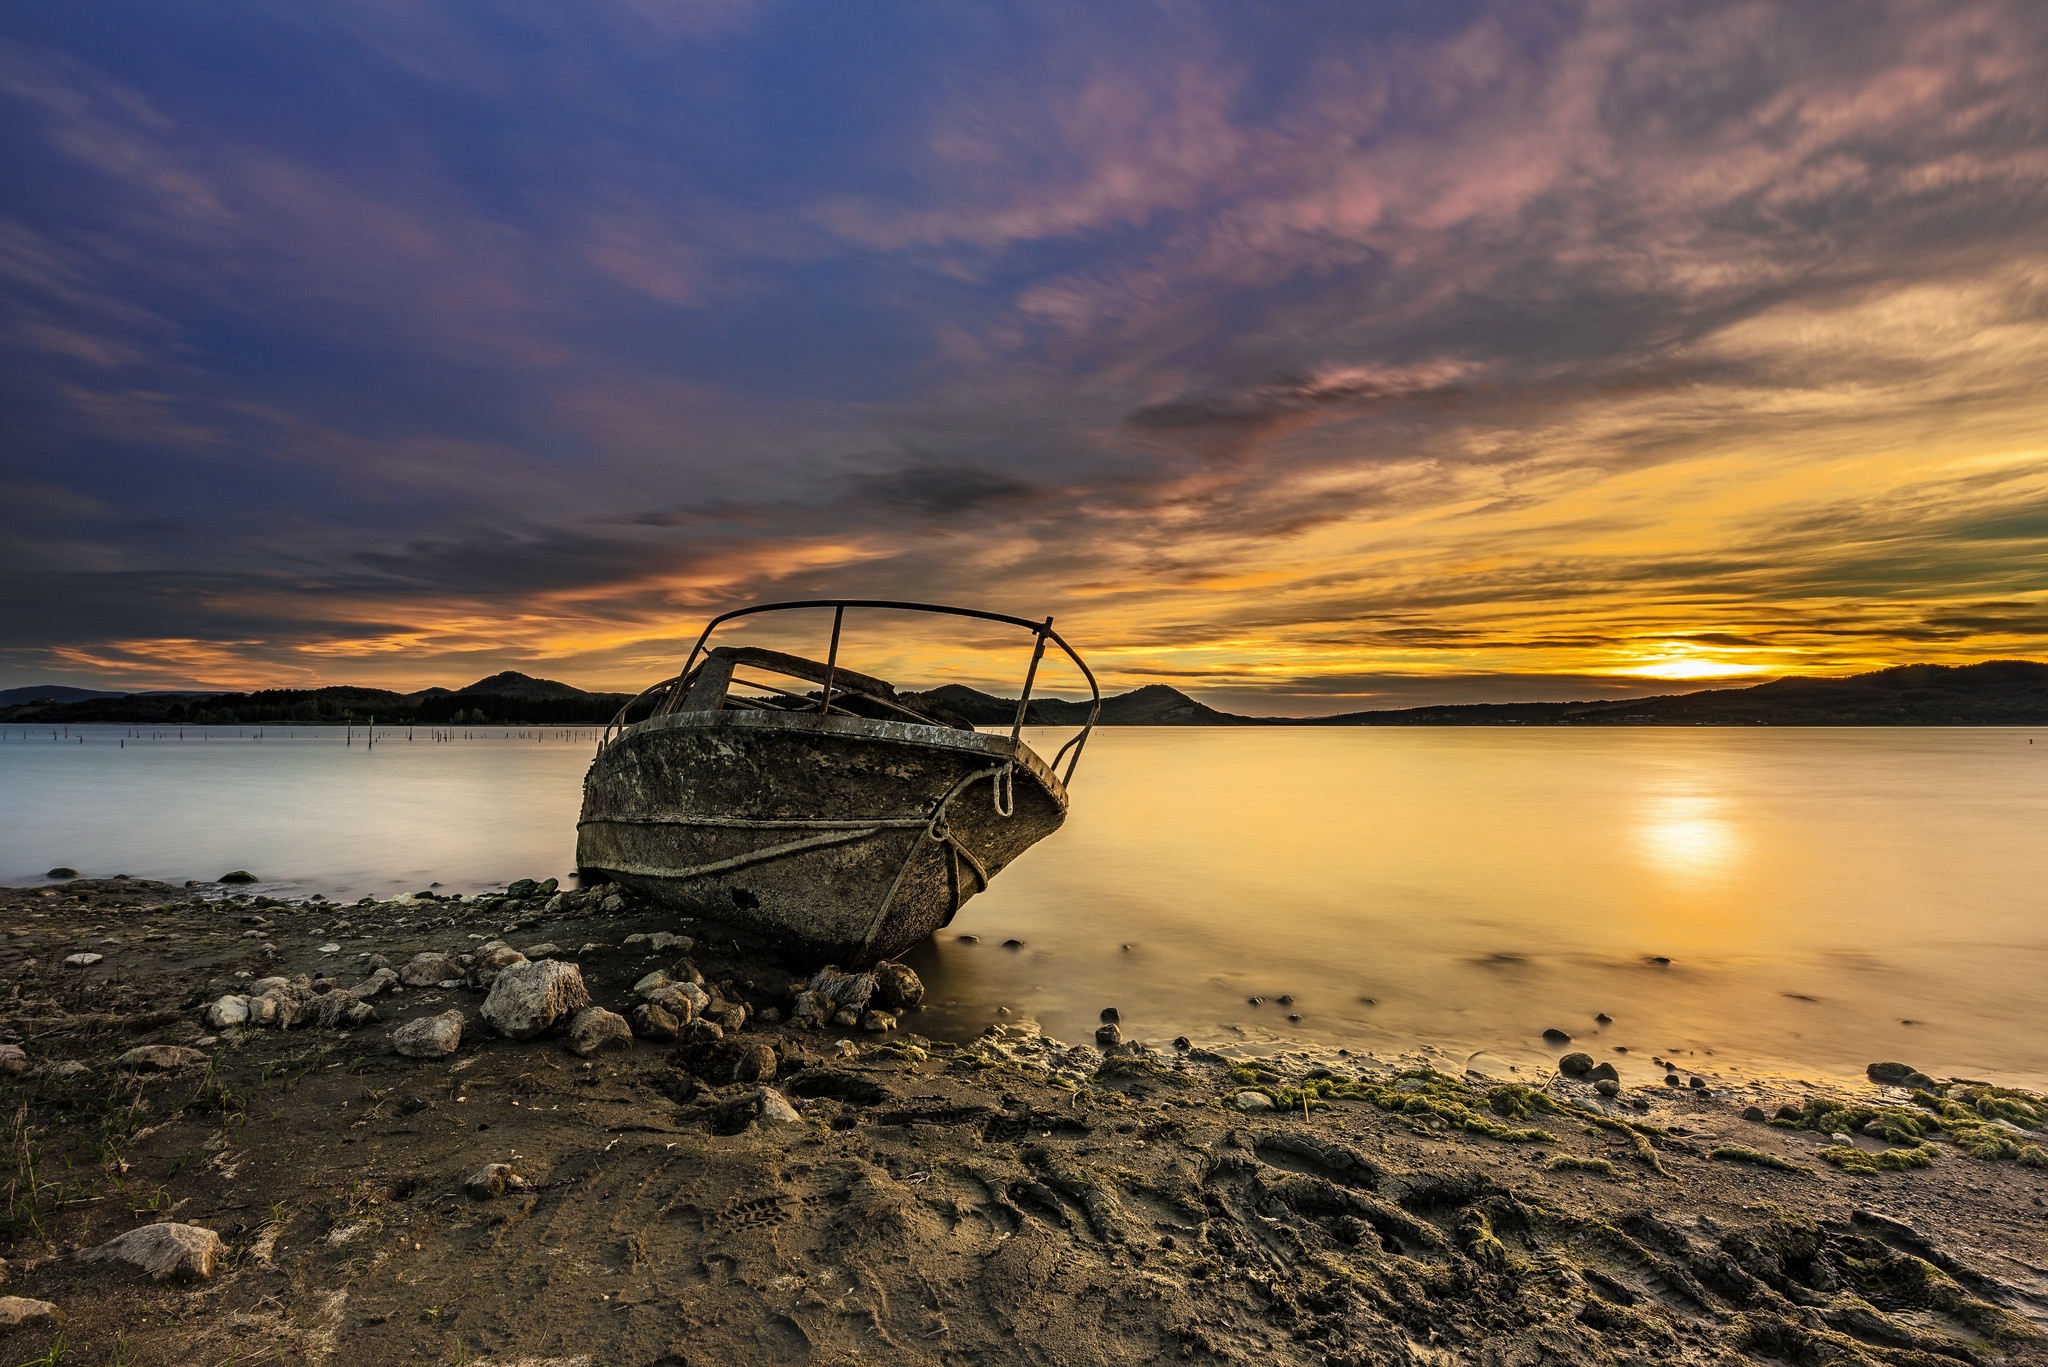 General 2048x1367 boat vehicle sky nature low light